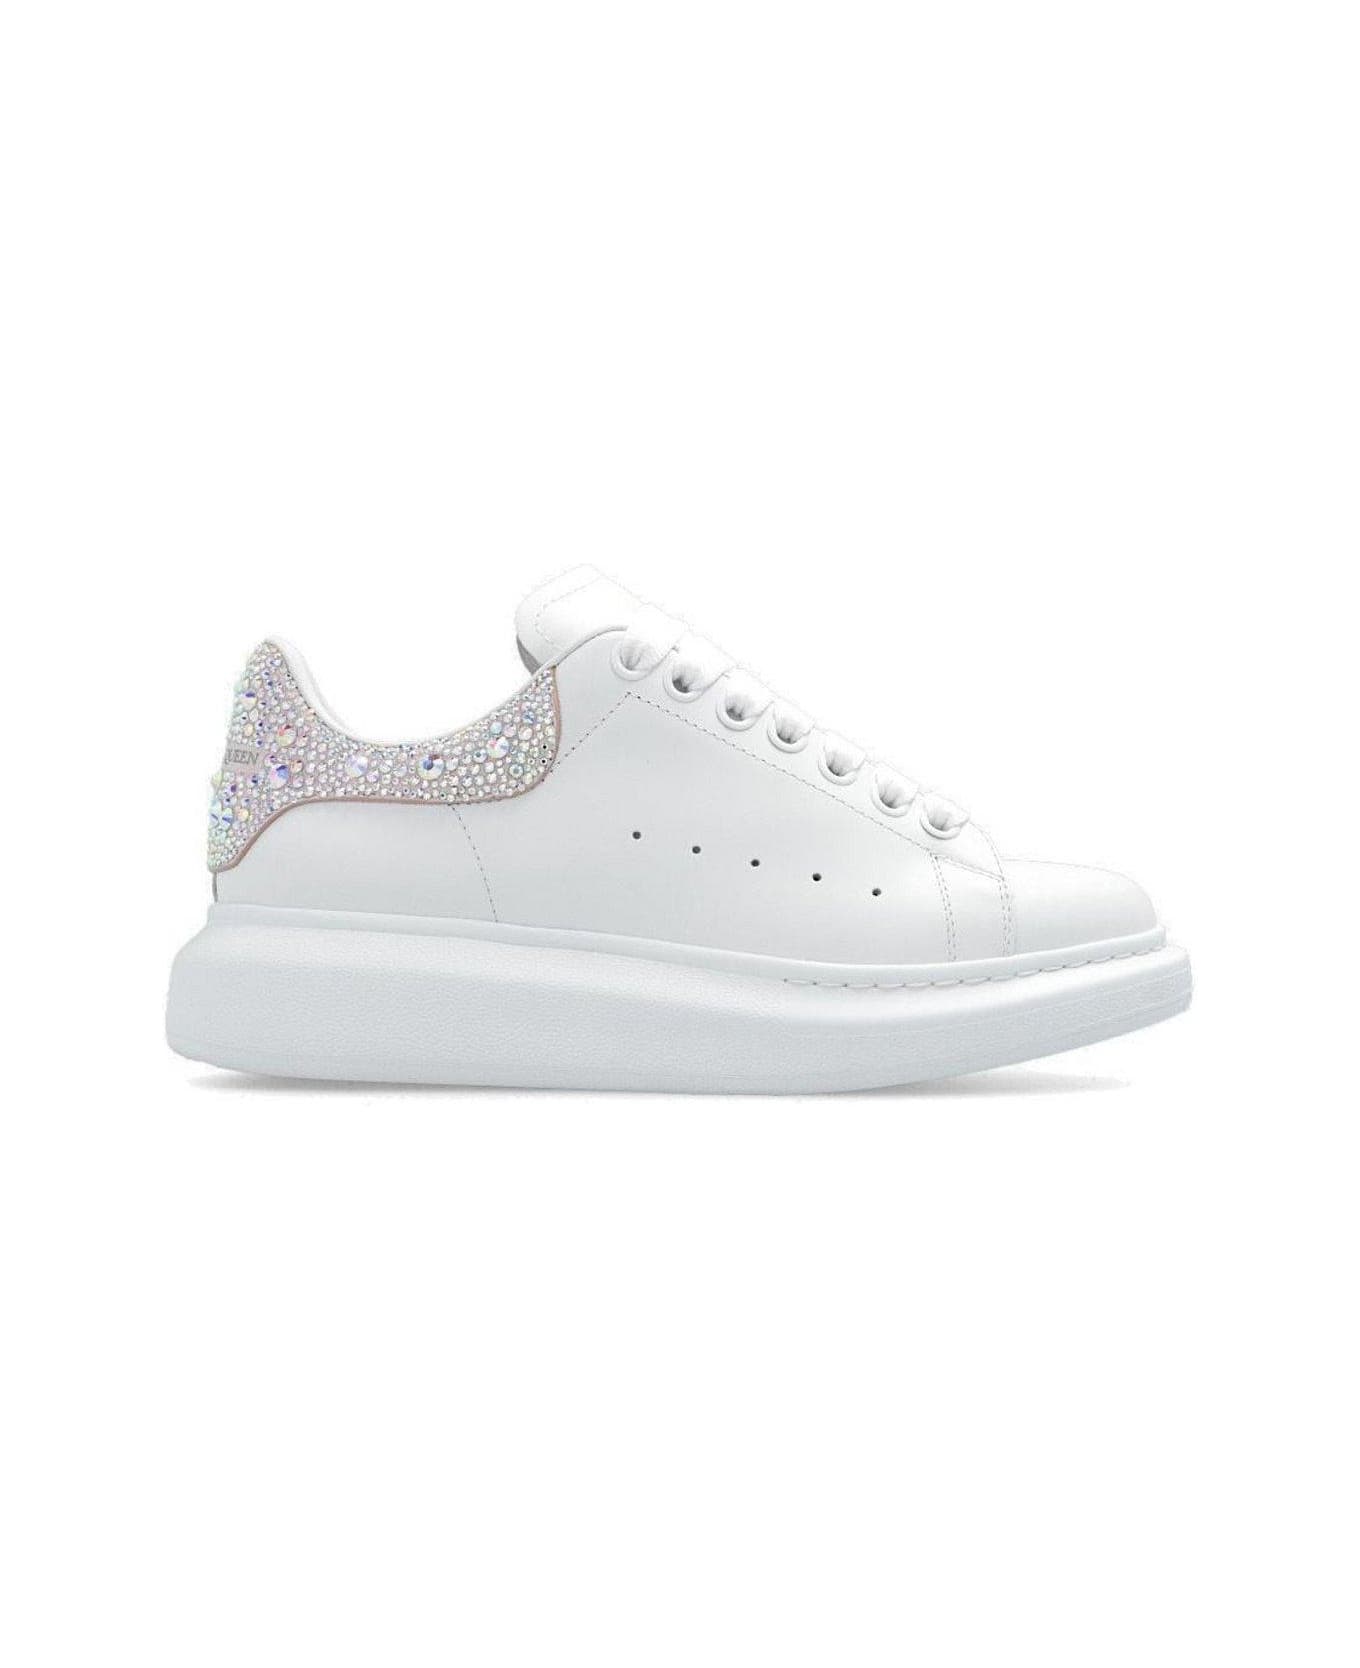 Alexander McQueen Larry Embellished Chunky Sneakers - WHITE/PORCELAIN